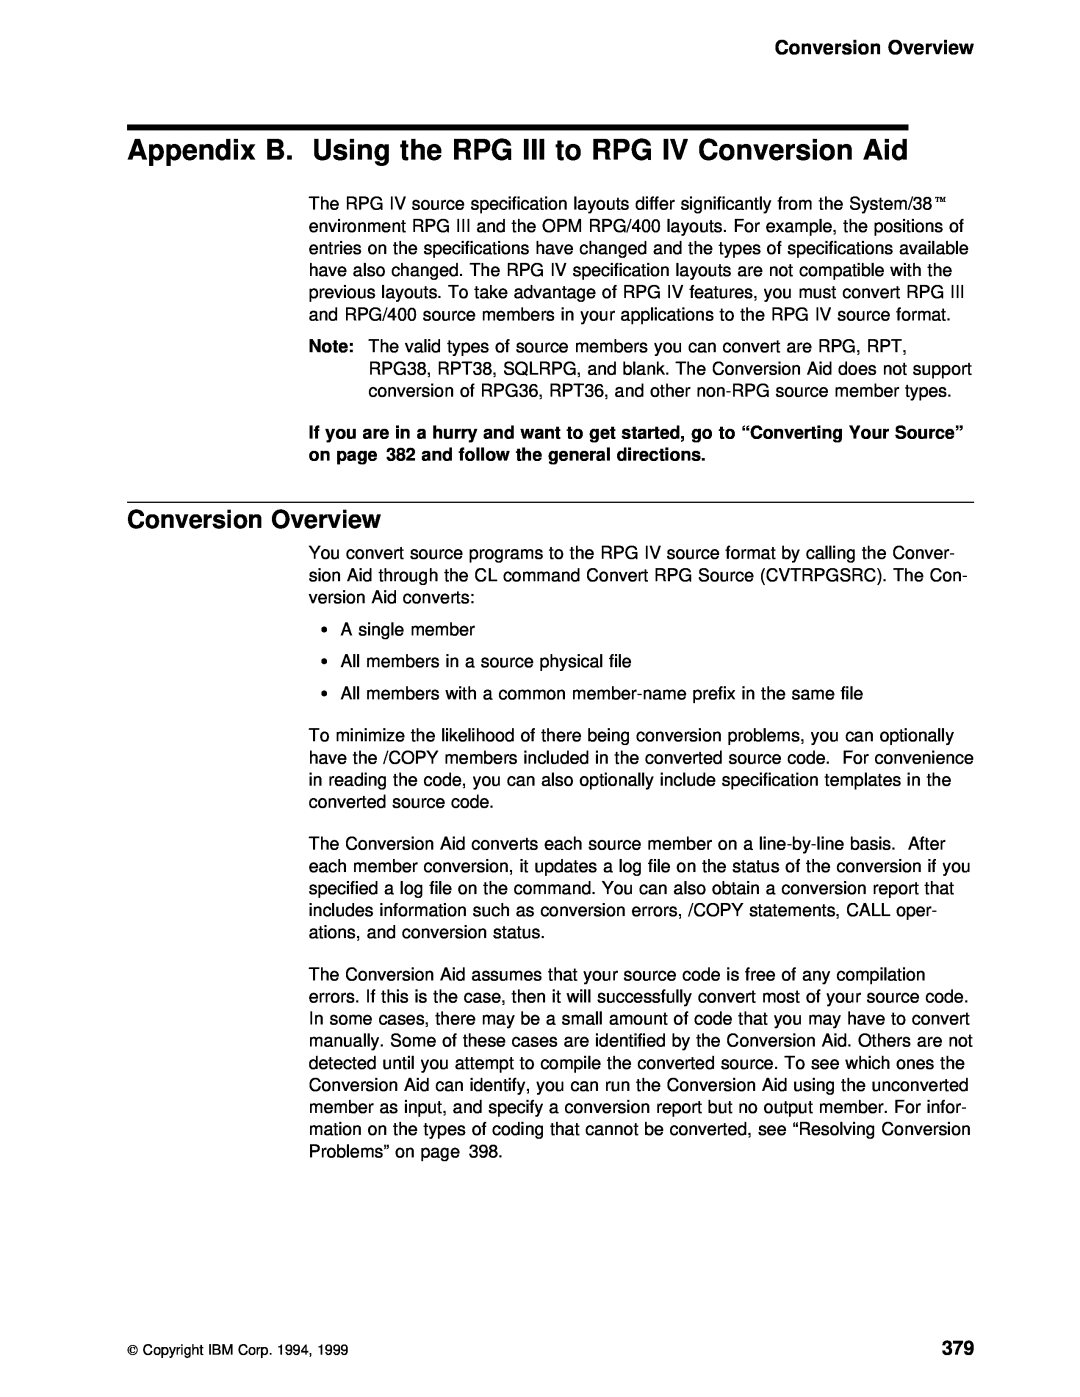 IBM AS/400 manual Appendix B. Using, Conversion Overview 